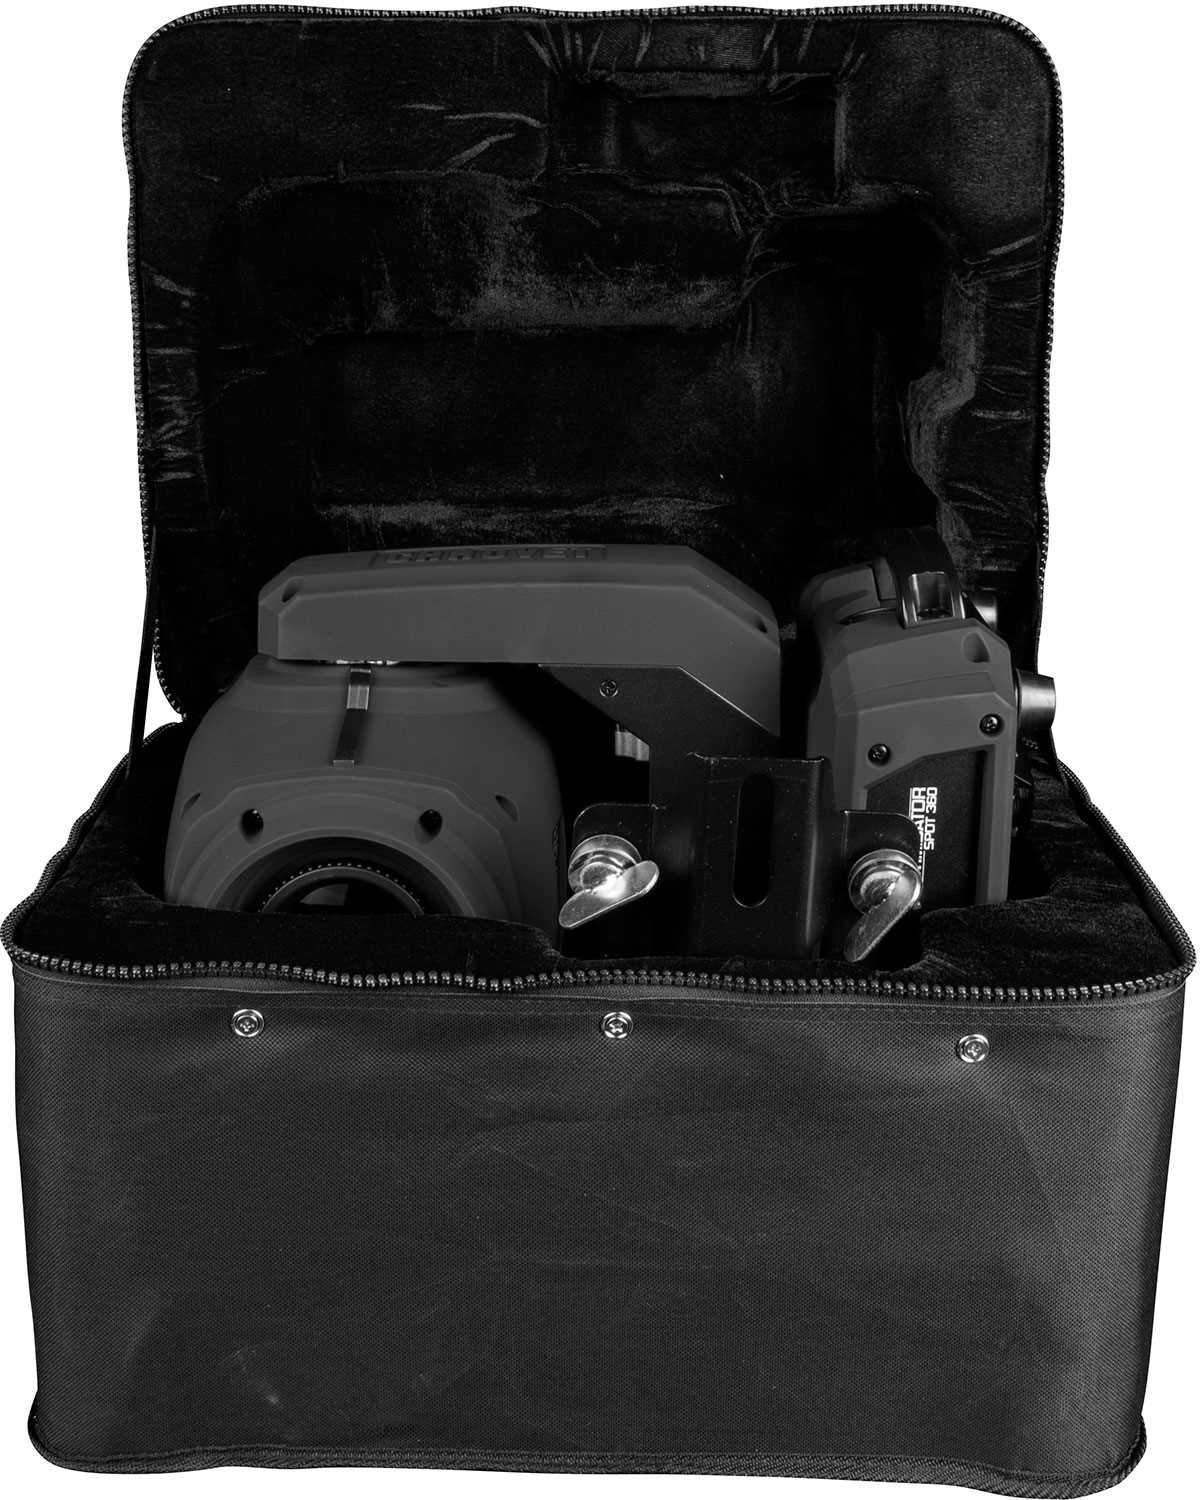 Chauvet CHS-360 VIP Carry Bag for Intim Spot 360 & Similar Fixtures - ProSound and Stage Lighting